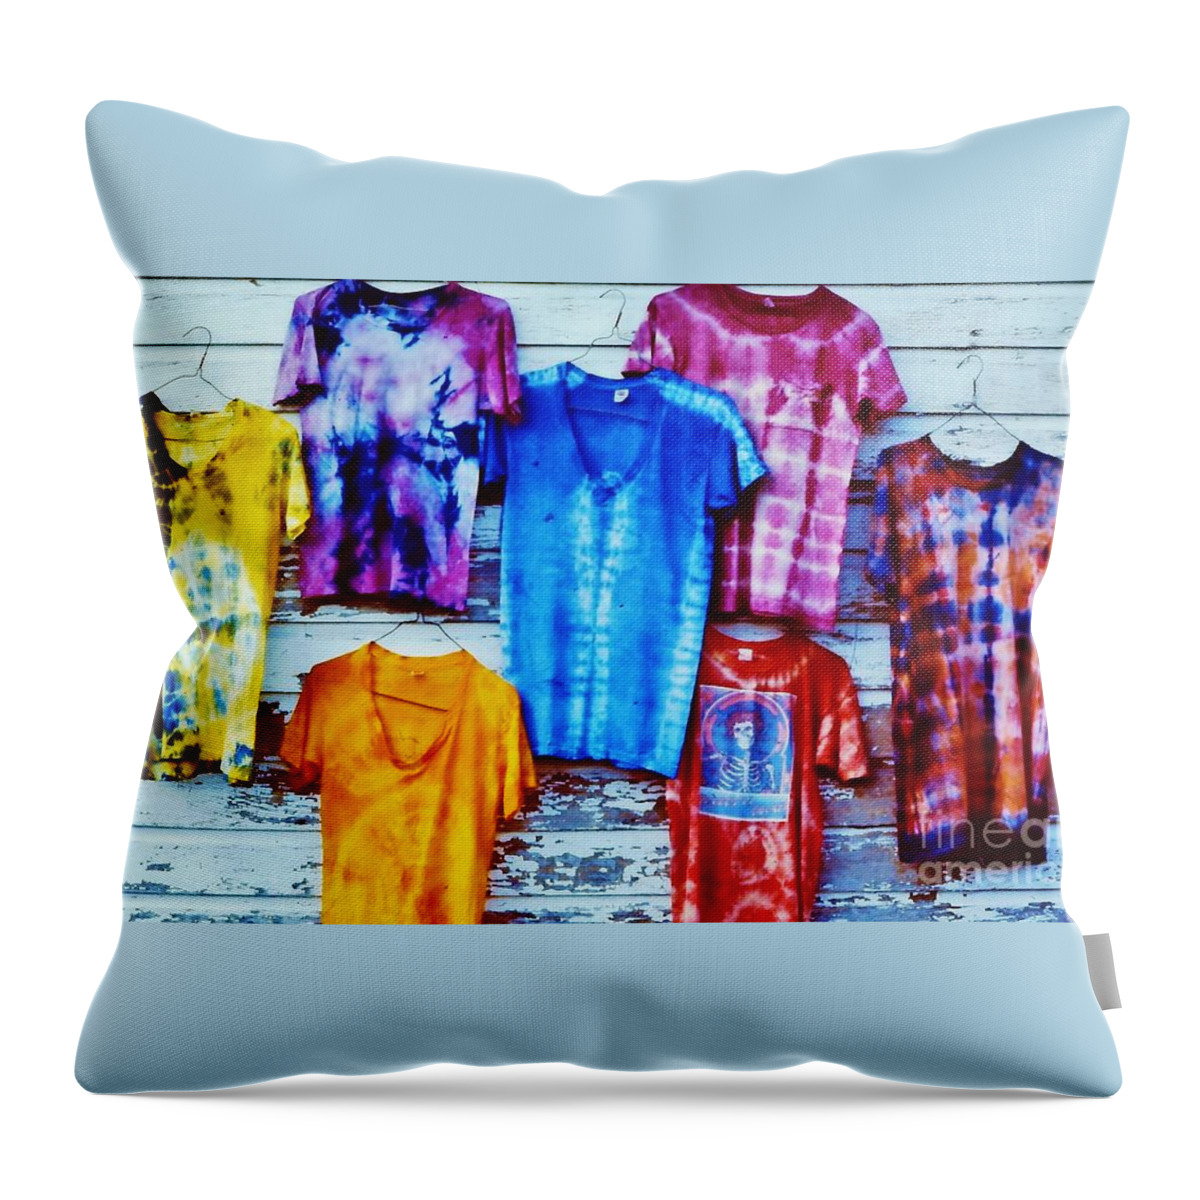 Tie Dye Throw Pillow featuring the photograph Grateful Dead Tie Dye by Susan Carella